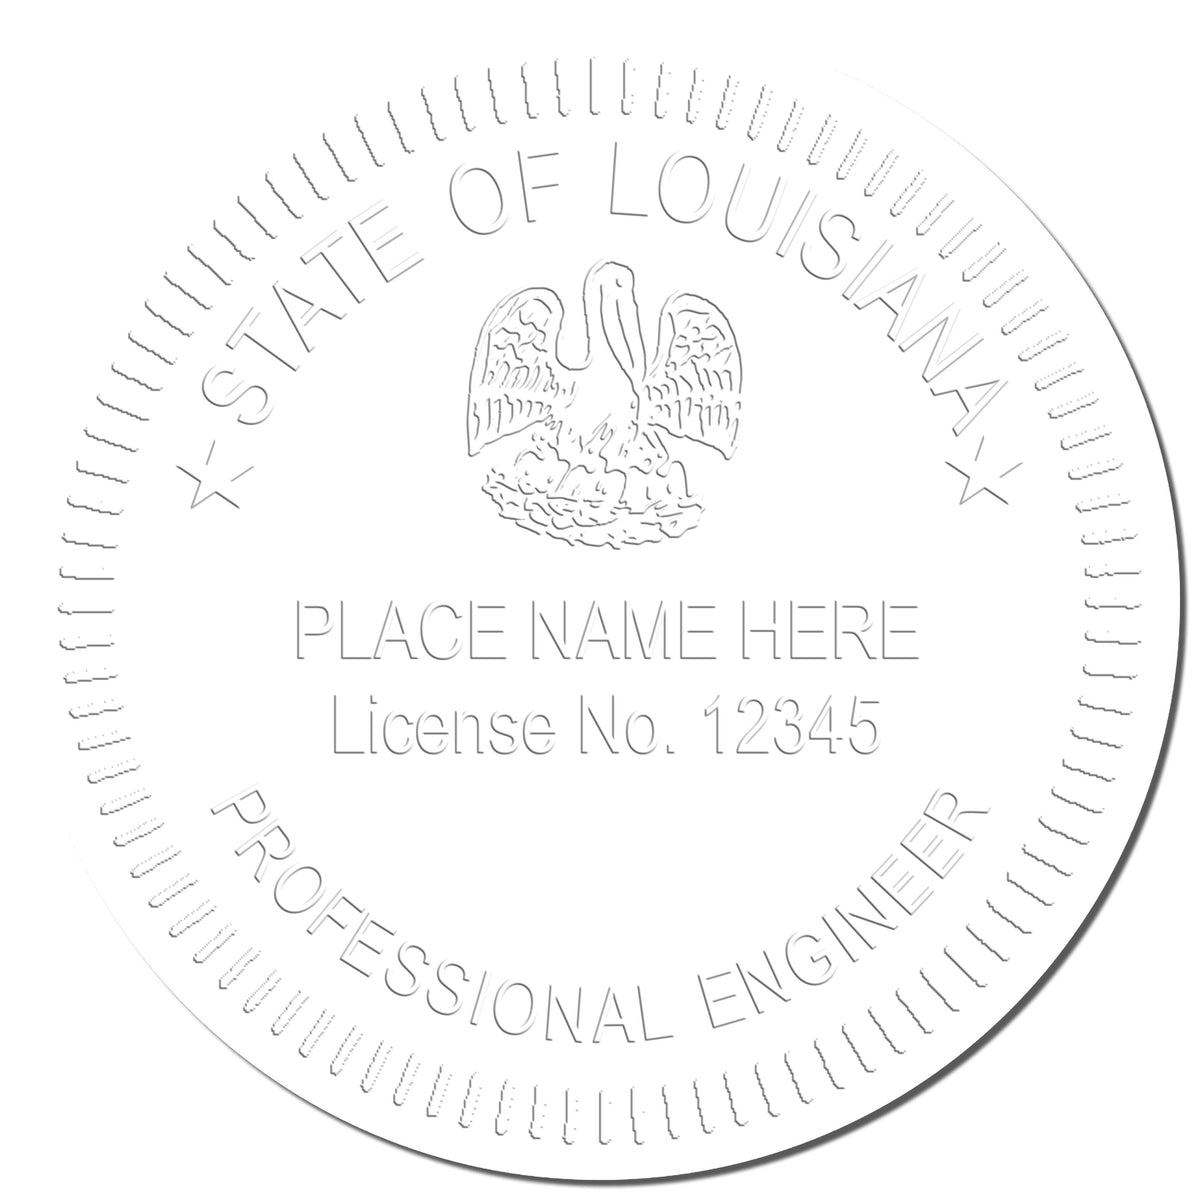 This paper is stamped with a sample imprint of the Heavy Duty Cast Iron Louisiana Engineer Seal Embosser, signifying its quality and reliability.